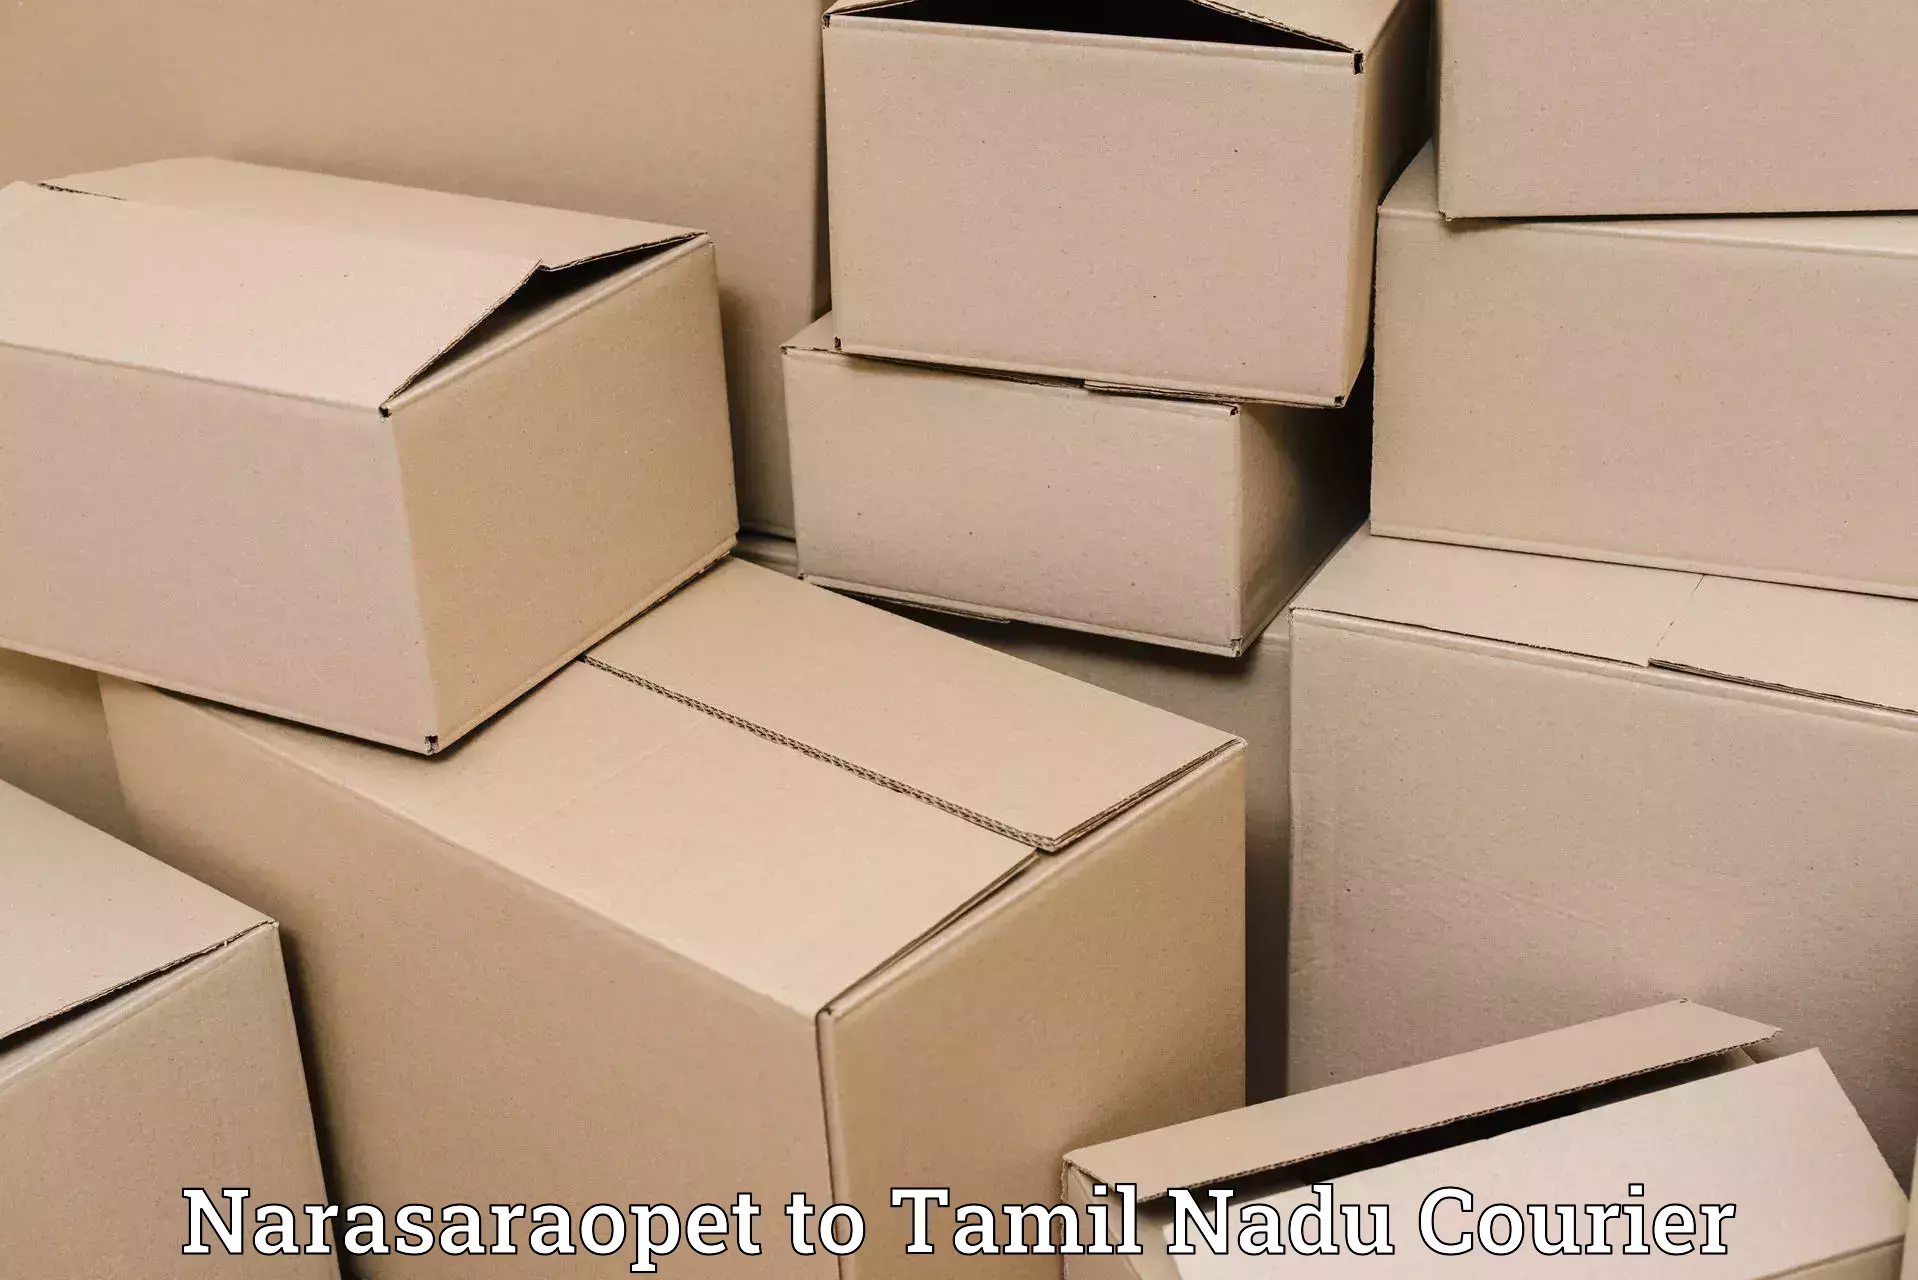 High-quality delivery services Narasaraopet to Arani